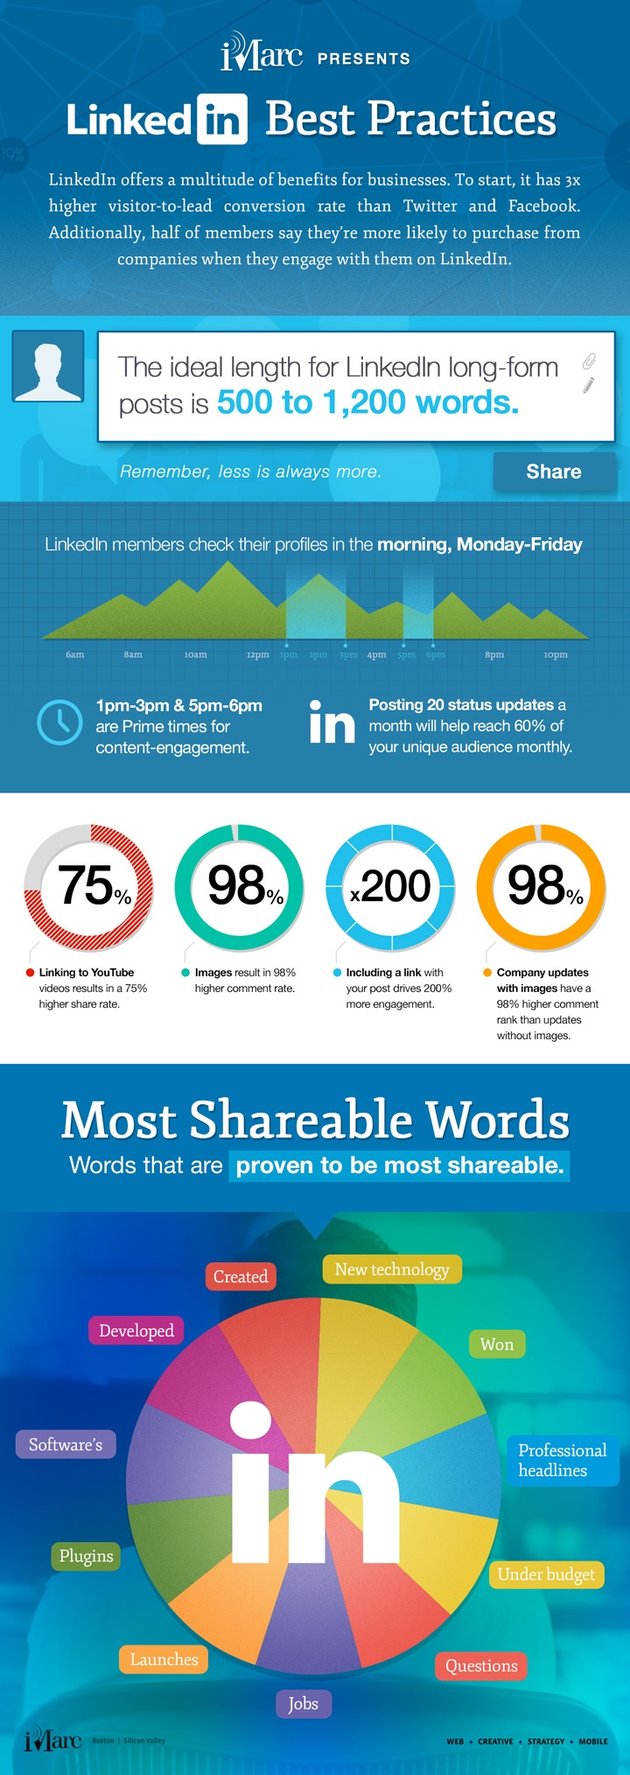 How To Gain More Engagement On LinkedIn With Proper Post Practices Infographic image